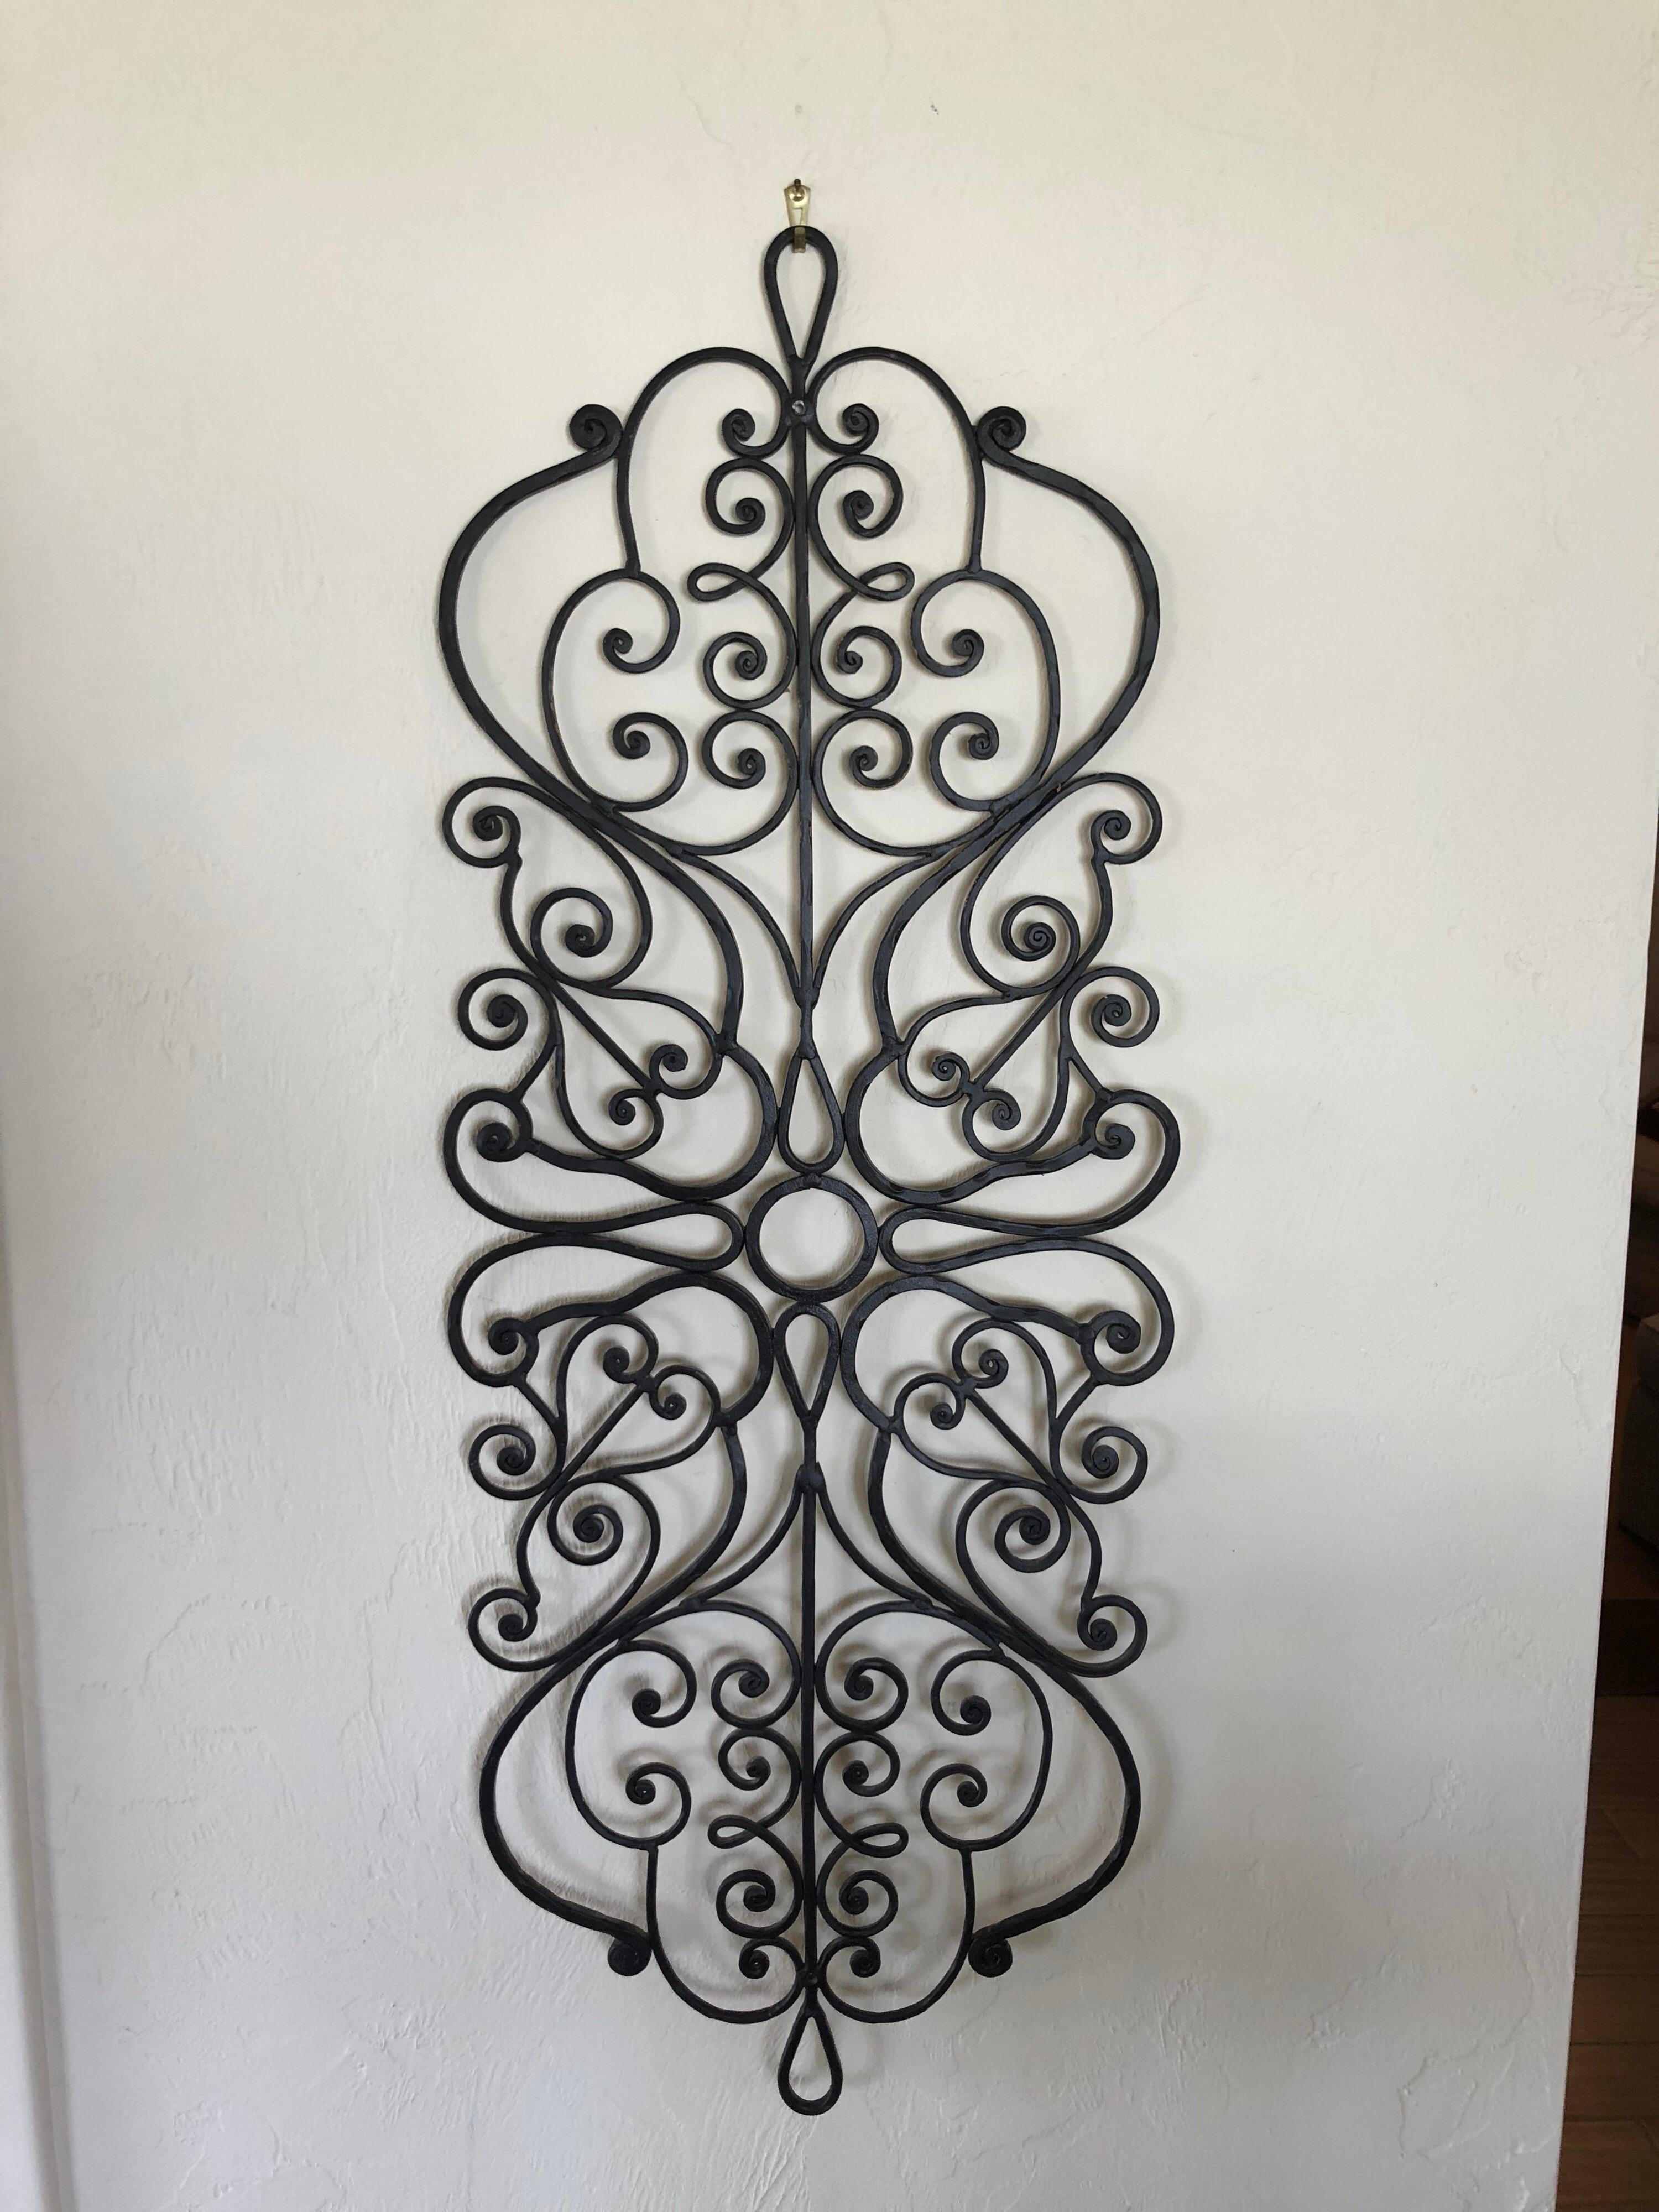 Large hand-wrought Iron wall sculpture. Ornate scrolls make up this decorative wall piece. This item is reversible or two sided. One side is a dark brown or black and the other is a light mustard golden yellow. This would look great on an exterior